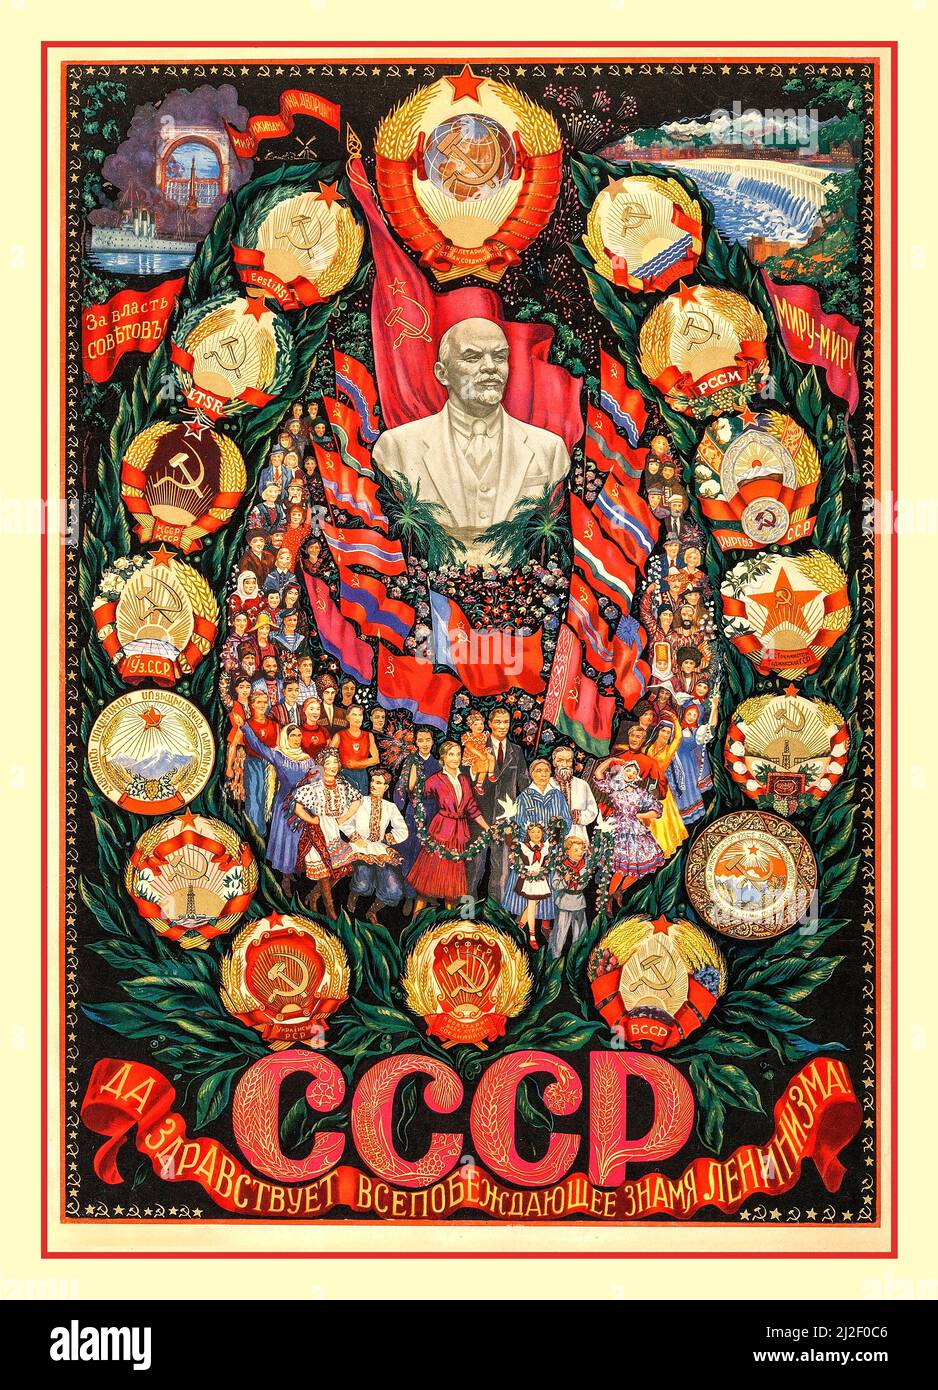 LENIN Vintage Russian Soviet CCCP Propaganda Poster “Long live the all-victorious banner flags of Leninism!”, Soviet poster, 1957, by Maria Alexandrovna Nesterova ( Nesterova-Bersina) (1897-1965) honouring Vladimir Lenin, with the peoples and flags that make the CCCP USSR states of the Soviet Union of Russia (including Ukraine) Stock Photo